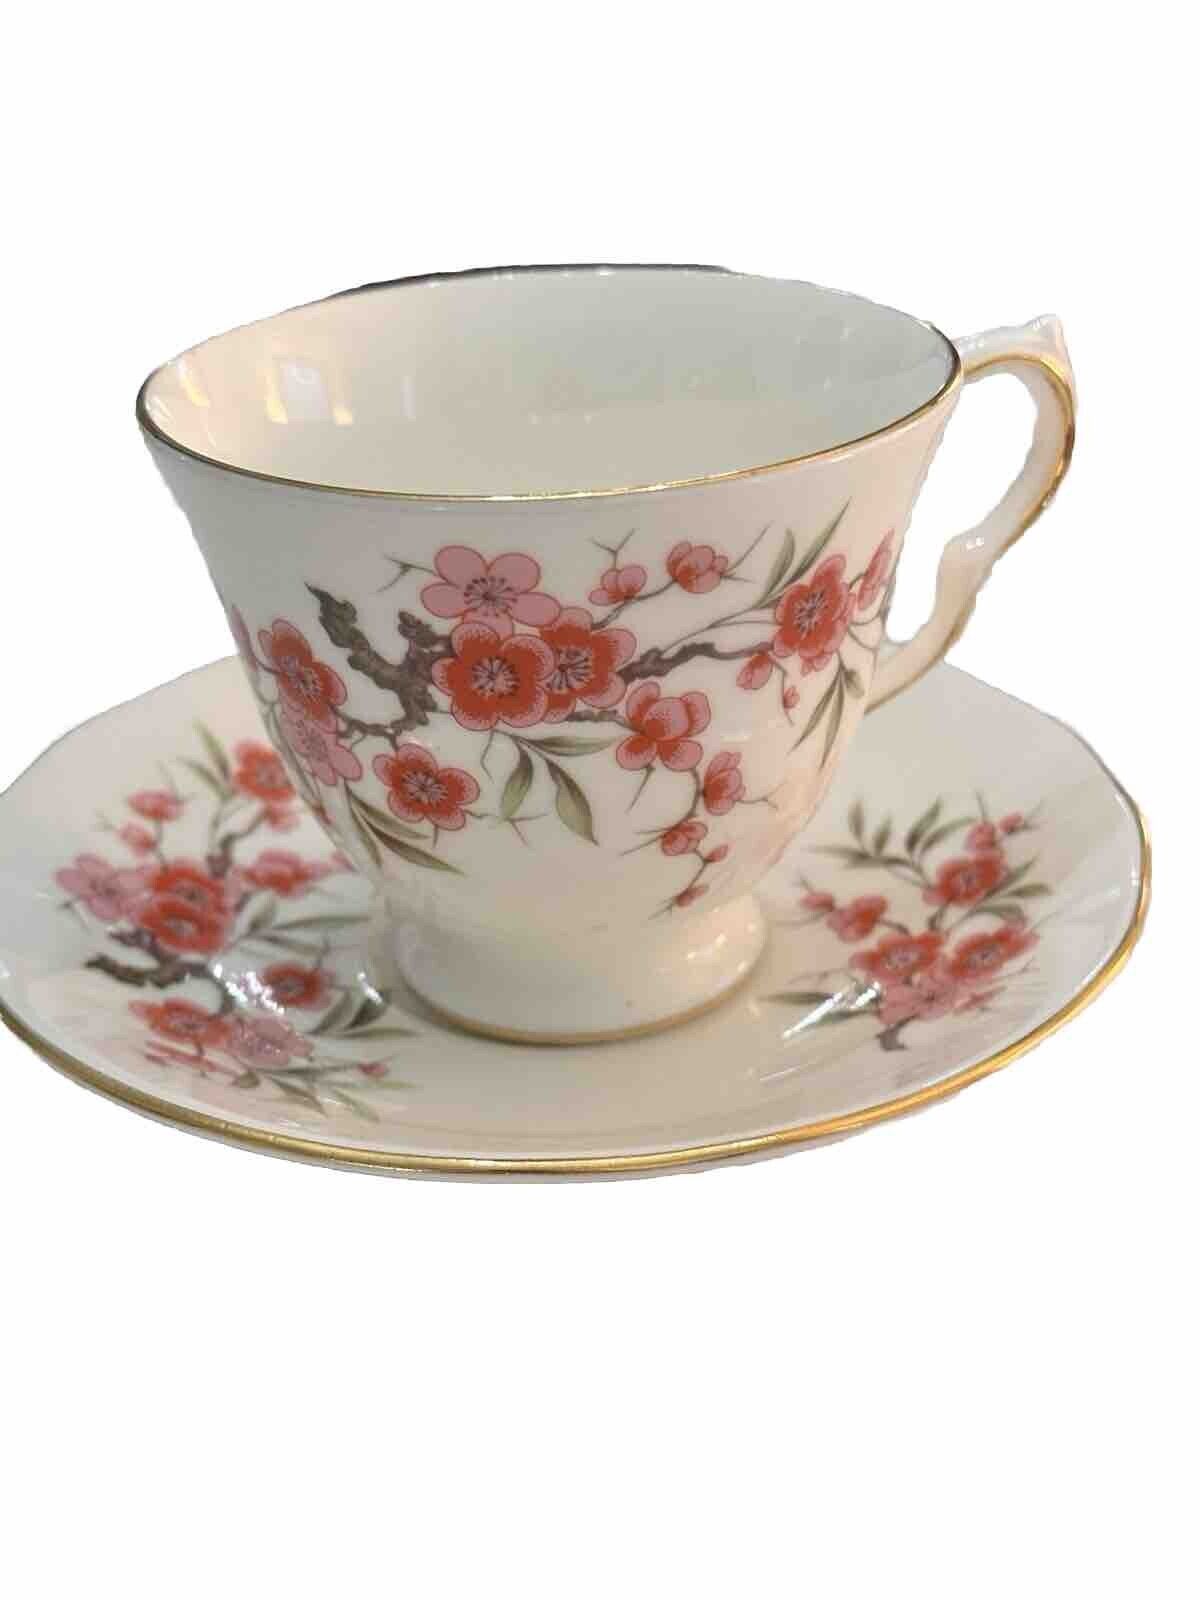 Queen Anne Bone China Tea Cup & Saucer Pink Floral Flowers  Gold Trim  England